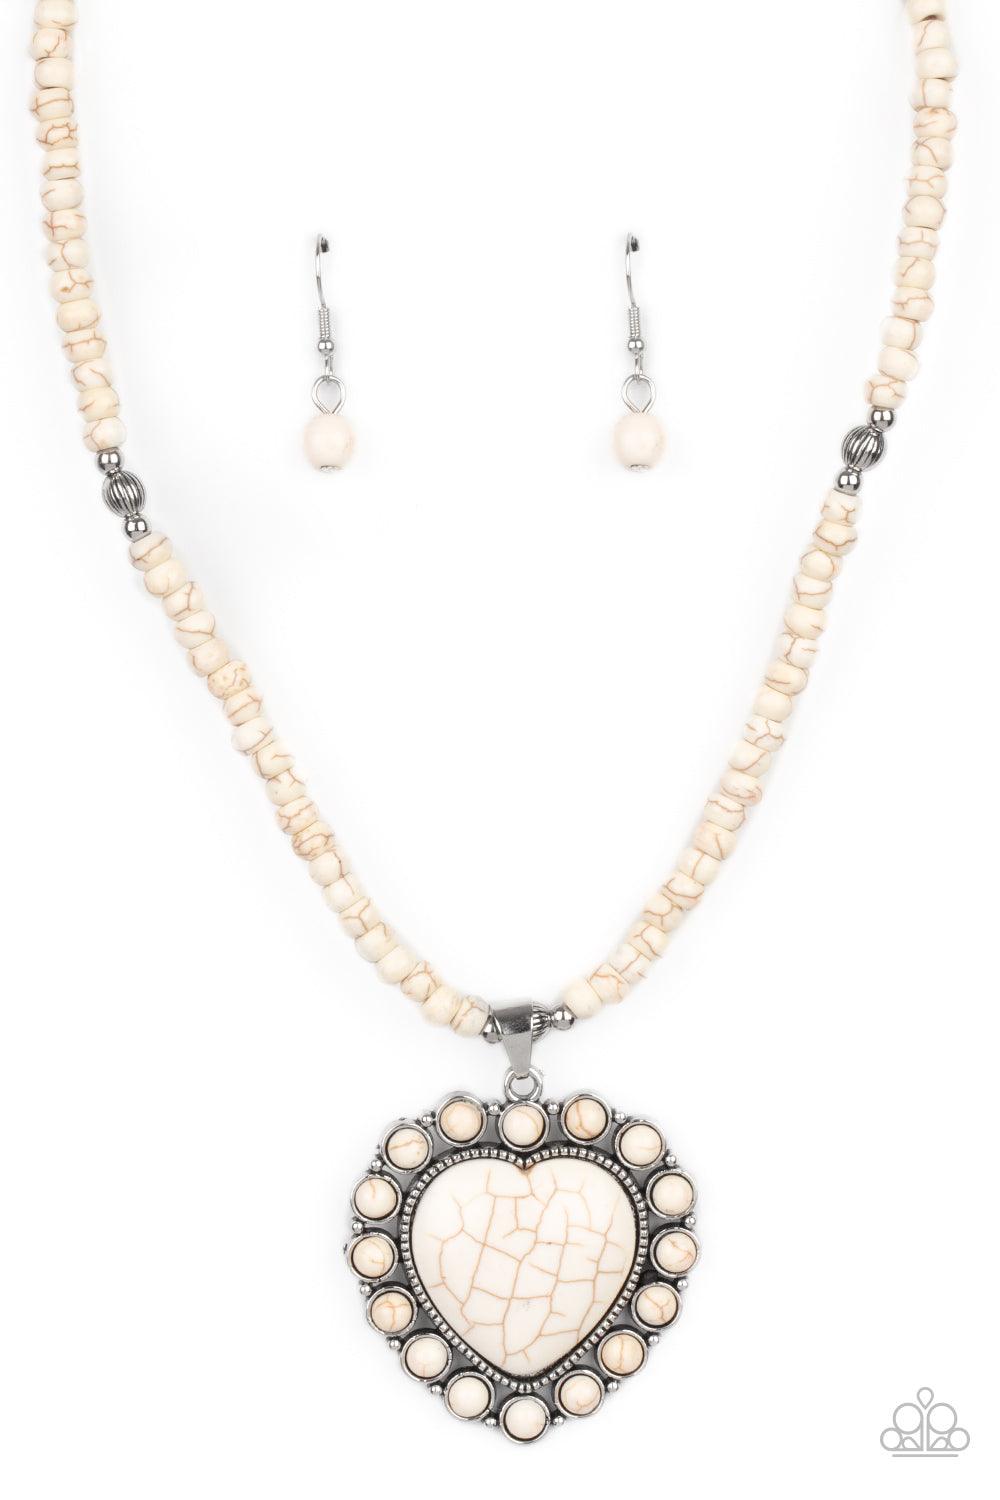 Paparazzi Accessories A Heart Of Stone - White Bordered by dainty white stones, an oversized white stone heart pendant swings from the bottom of a white stone and silver beaded display below the collar for a flirtatiously earthy fashion. Features an adjus